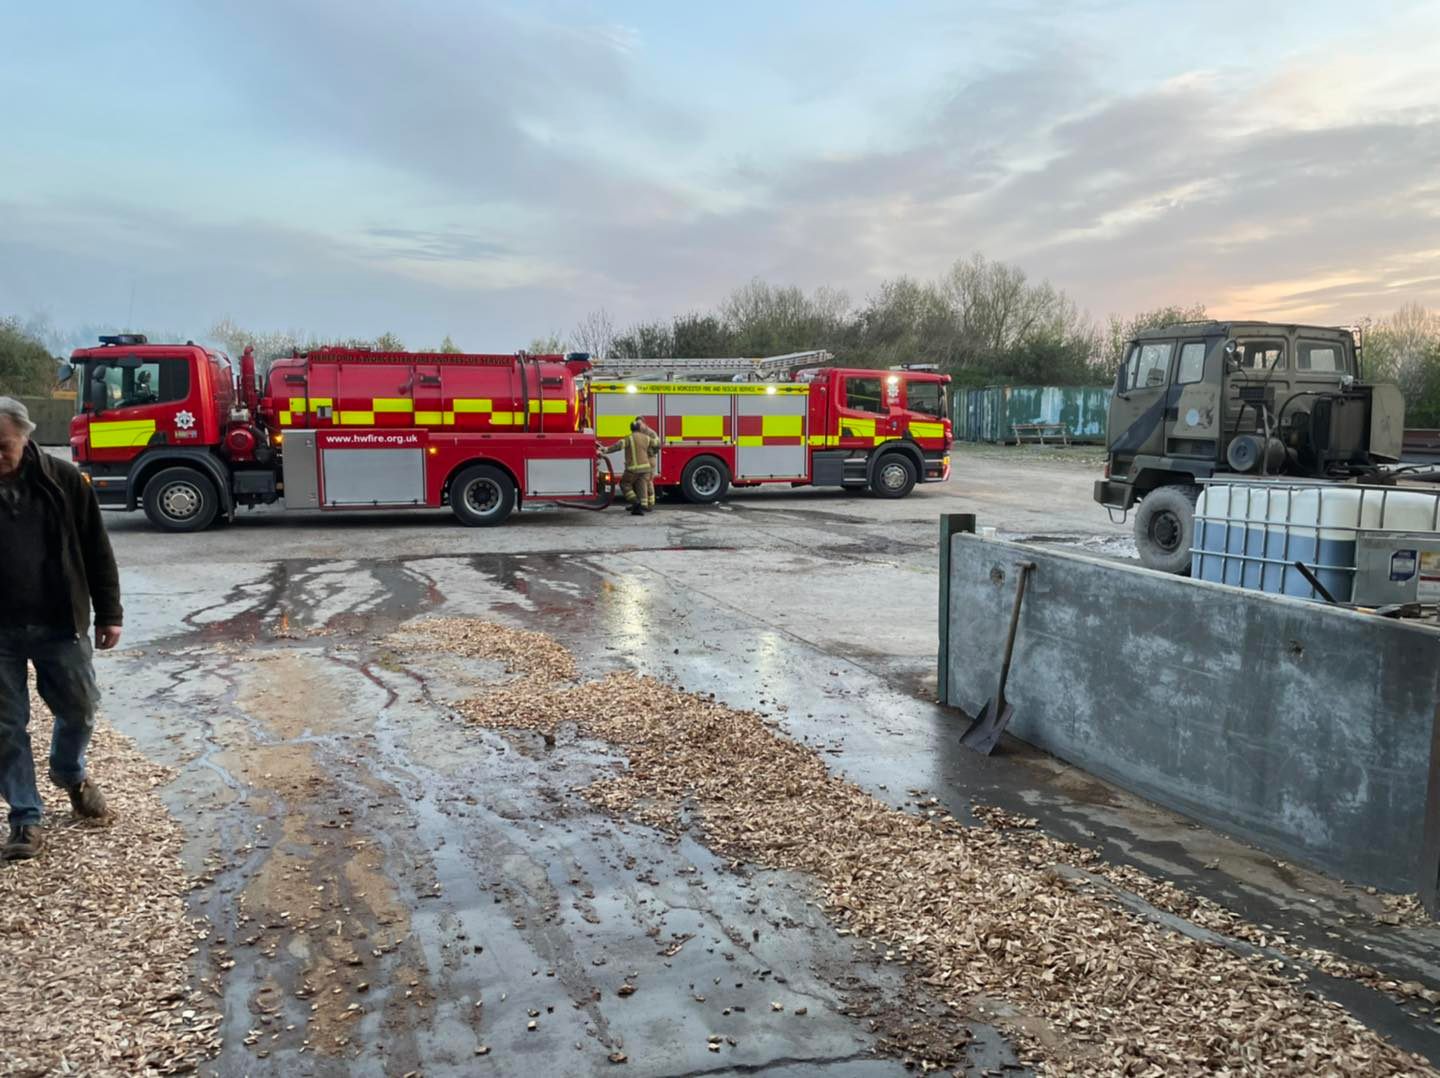 NEWS | Fire crews from across the county called to a fire at a building in Herefordshire overnight